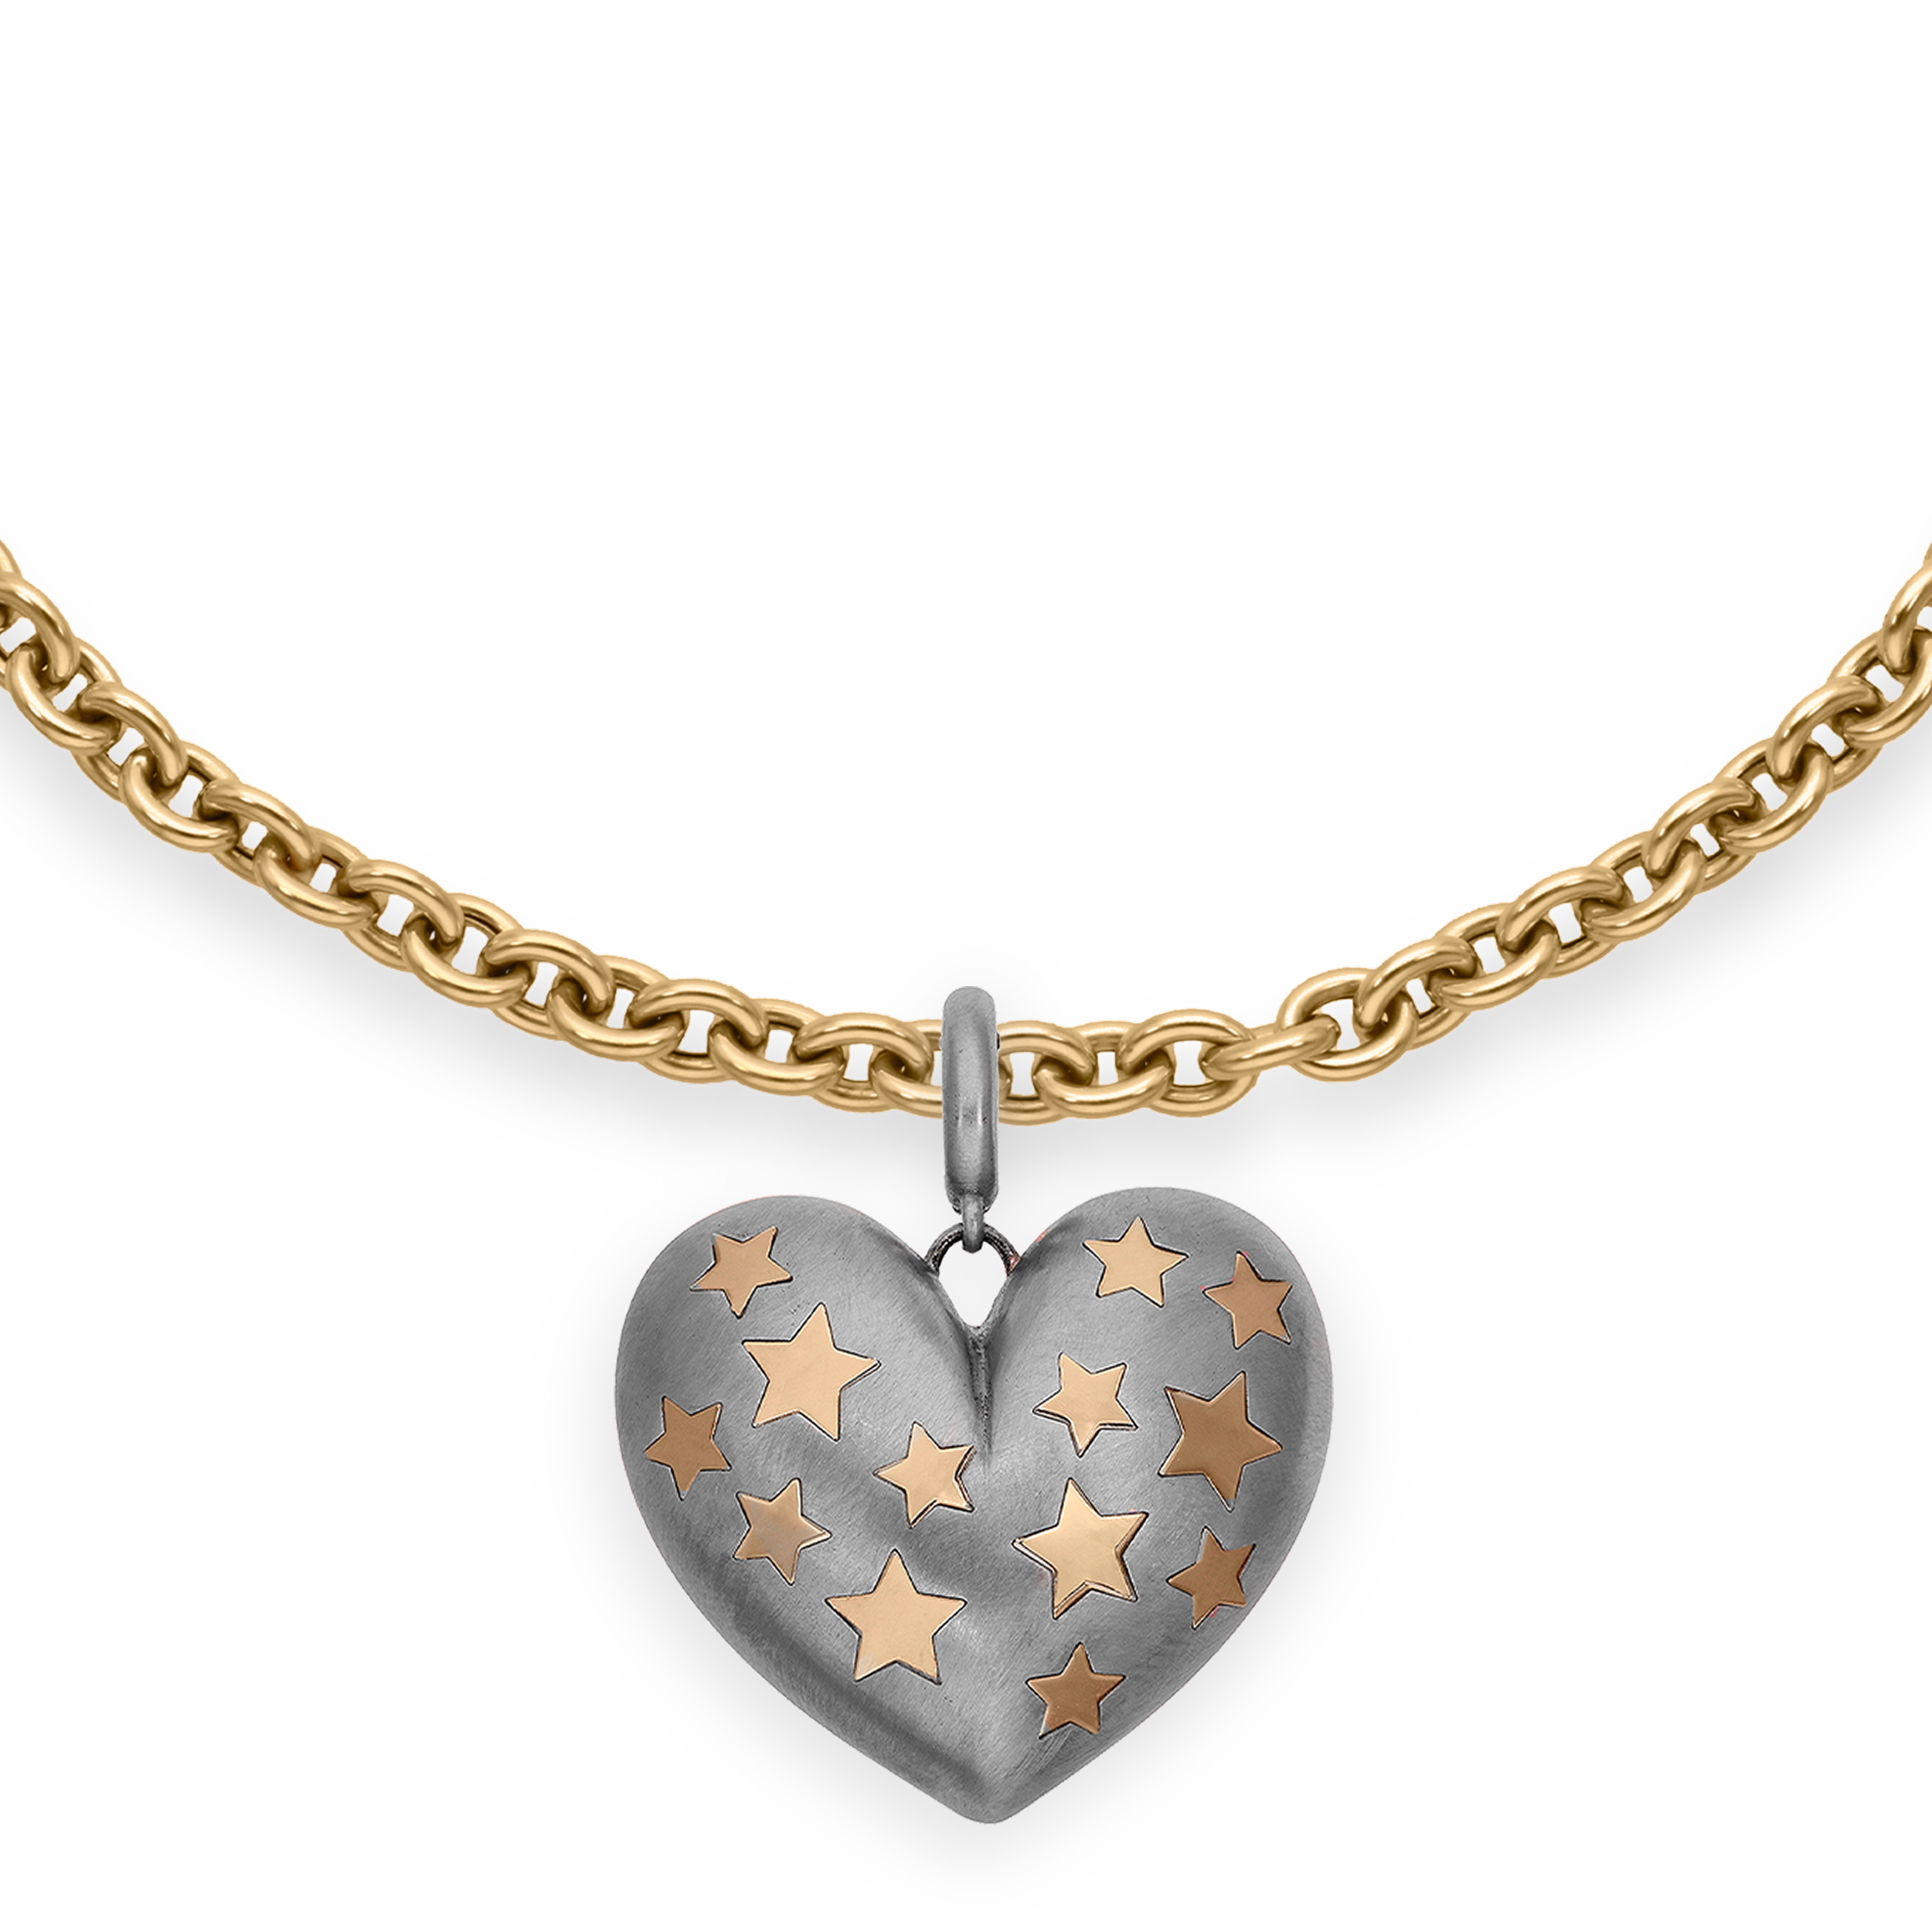 Paulette Brushed White Gold Heart with Yellow Gold Stars Pendant on Long Chain